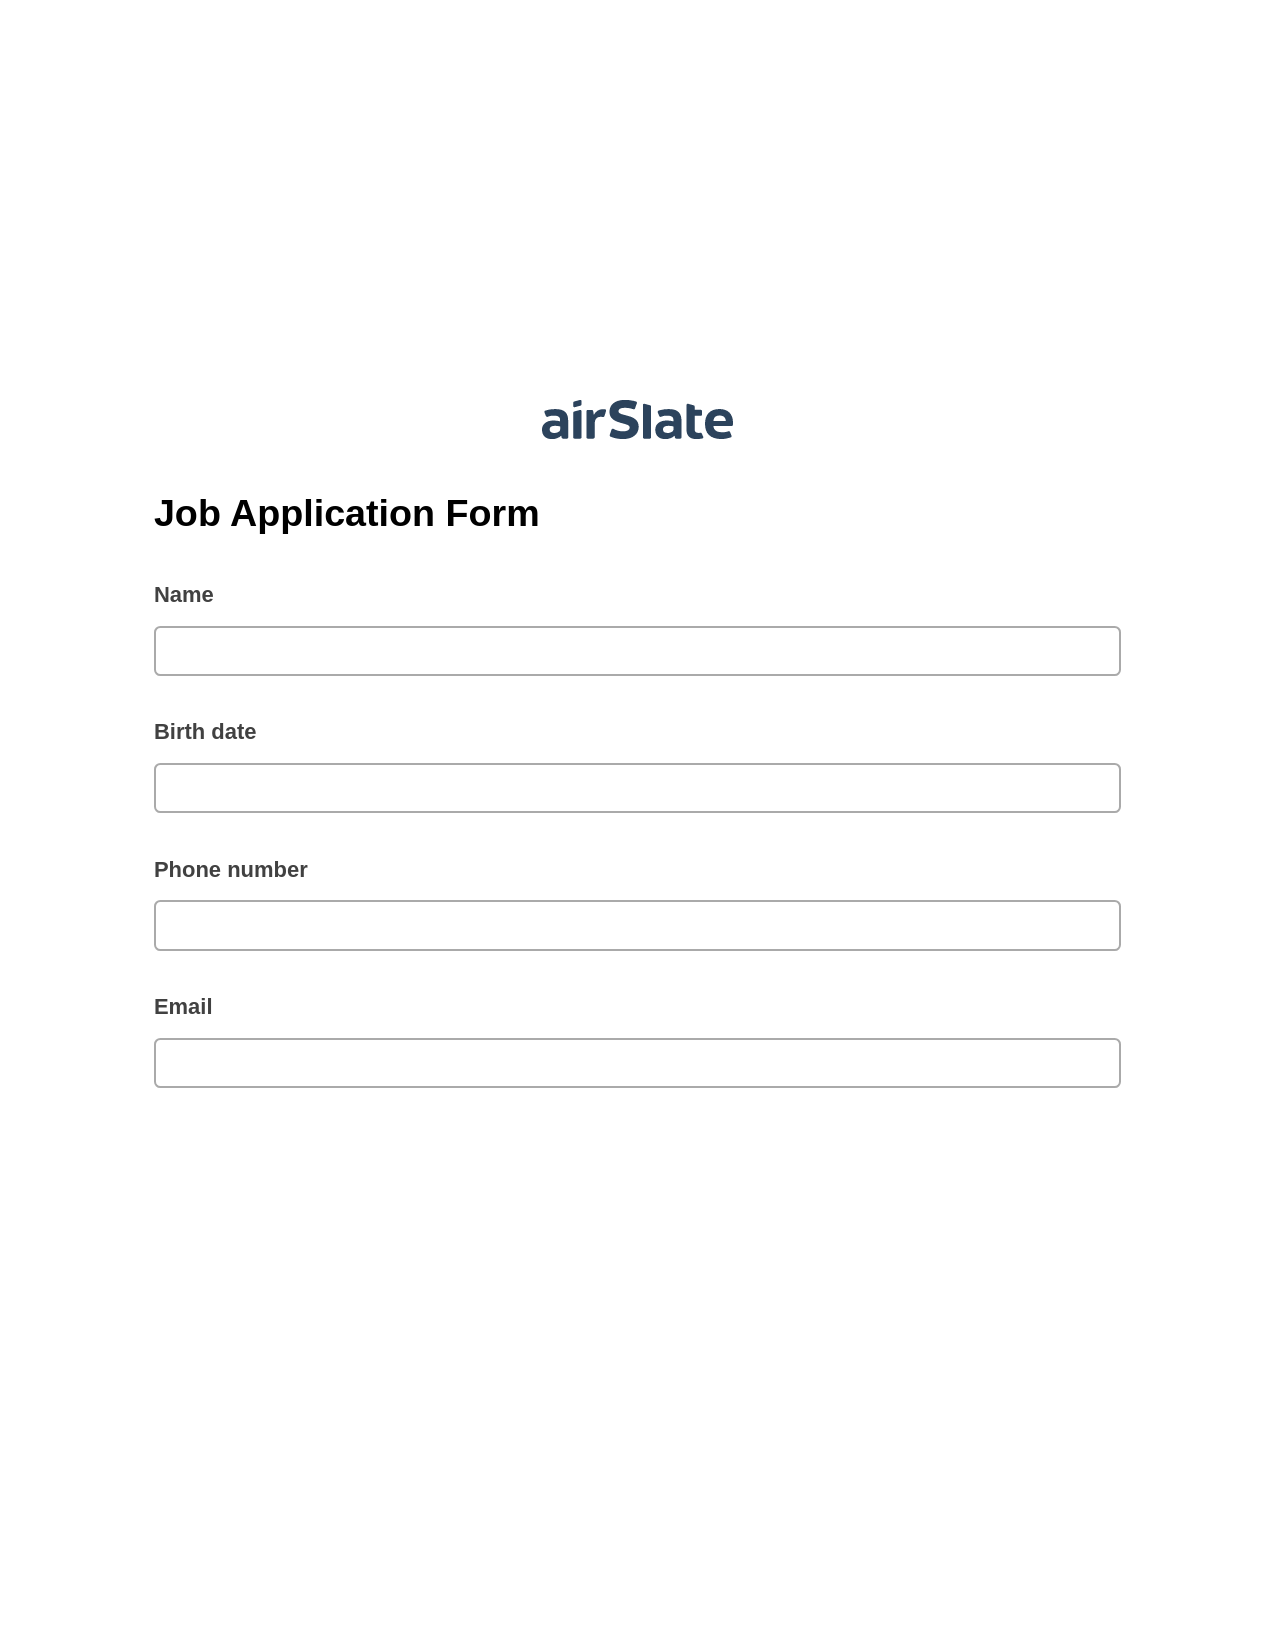 Multirole Job Application Form Pre-fill from CSV File Dropdown Options Bot, Text Message Notification Bot, Export to Formstack Documents Bot